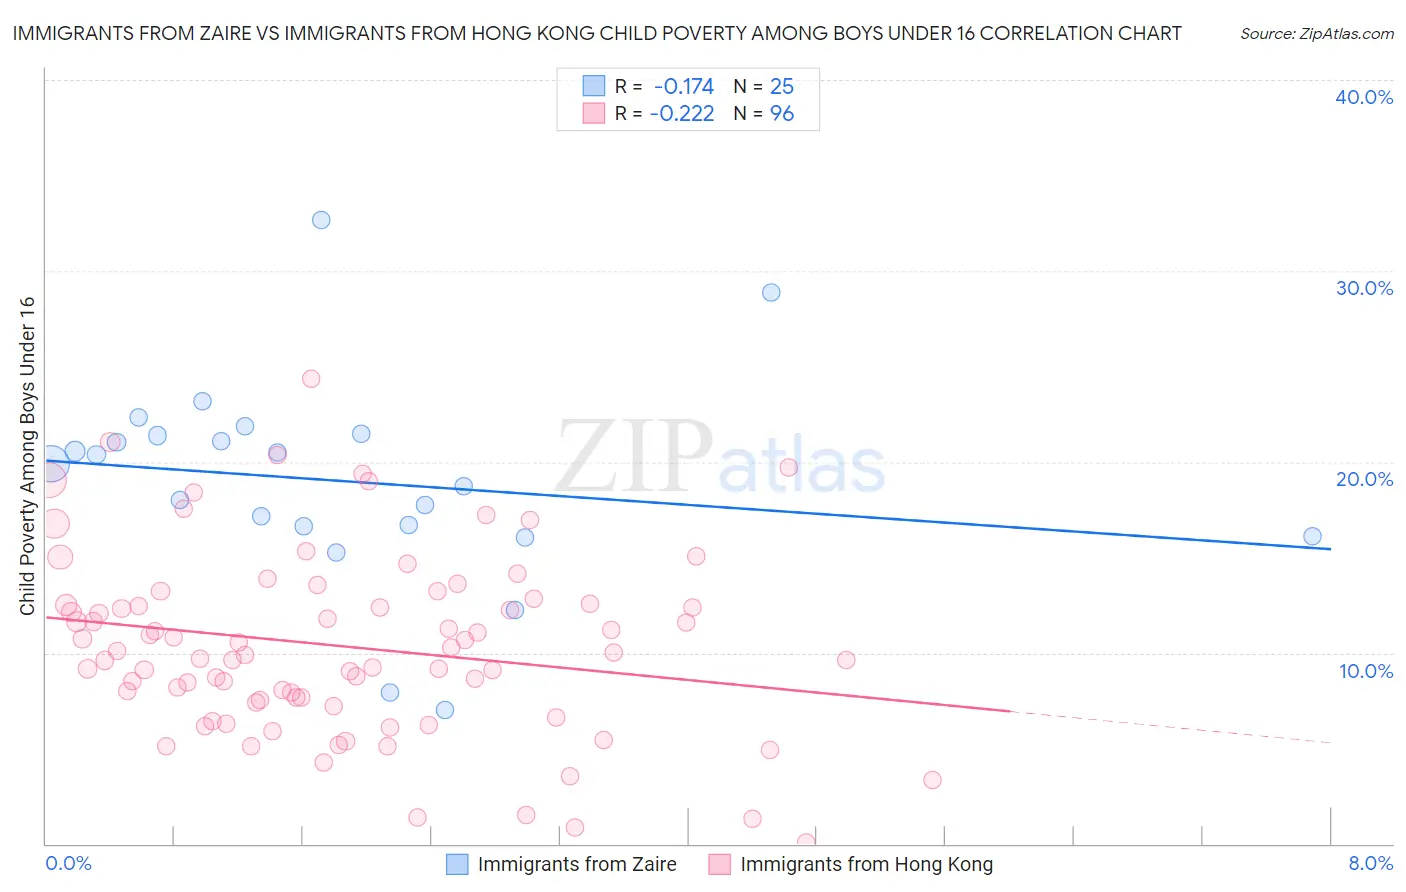 Immigrants from Zaire vs Immigrants from Hong Kong Child Poverty Among Boys Under 16